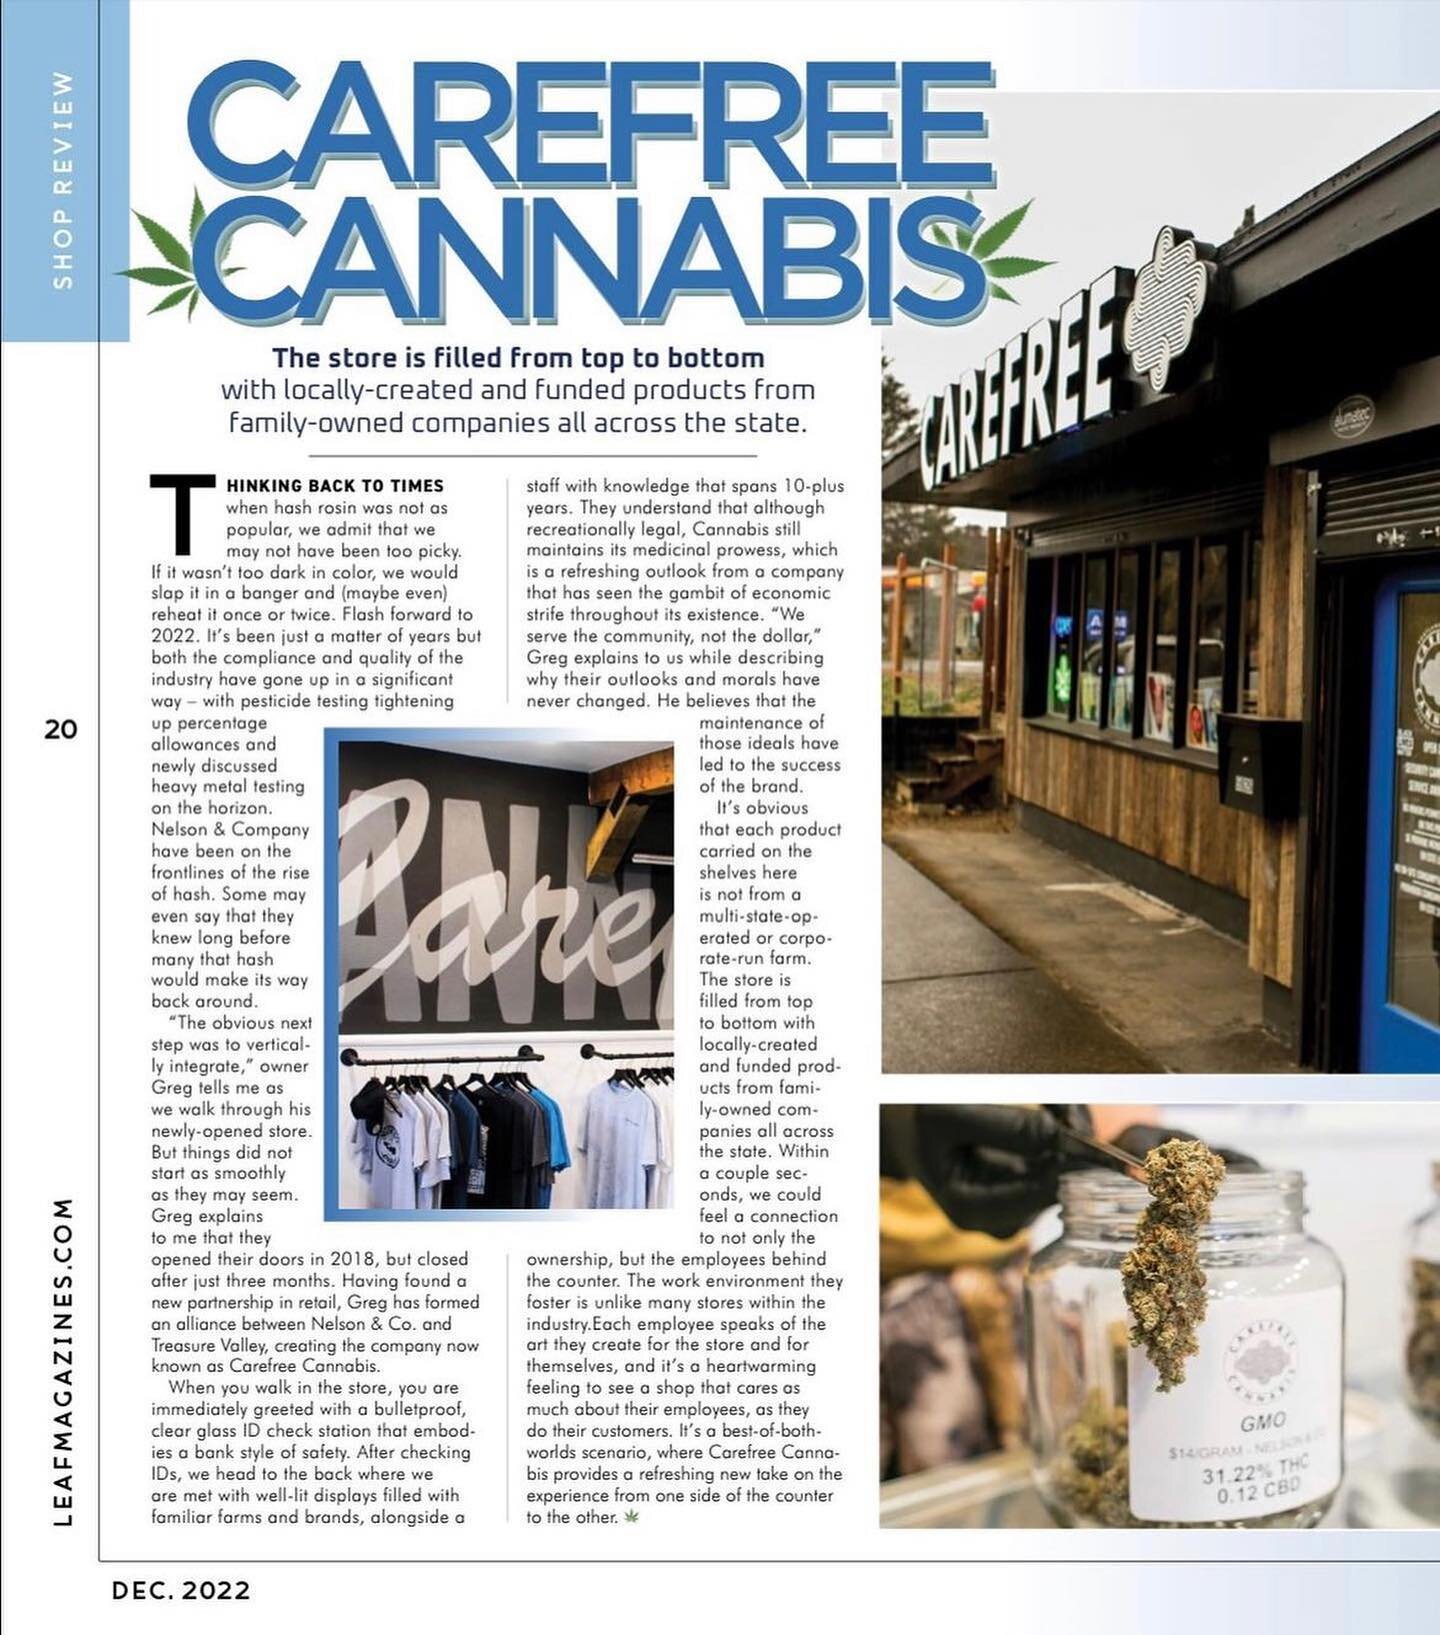 @oregonleaf Shop Review - December Issue featuring @carefreepdx, a local dispensary restoration project. #shoplocal 

&ldquo;The store is filled from top to bottom with locally-created and funded products from family-owned companies all across the st